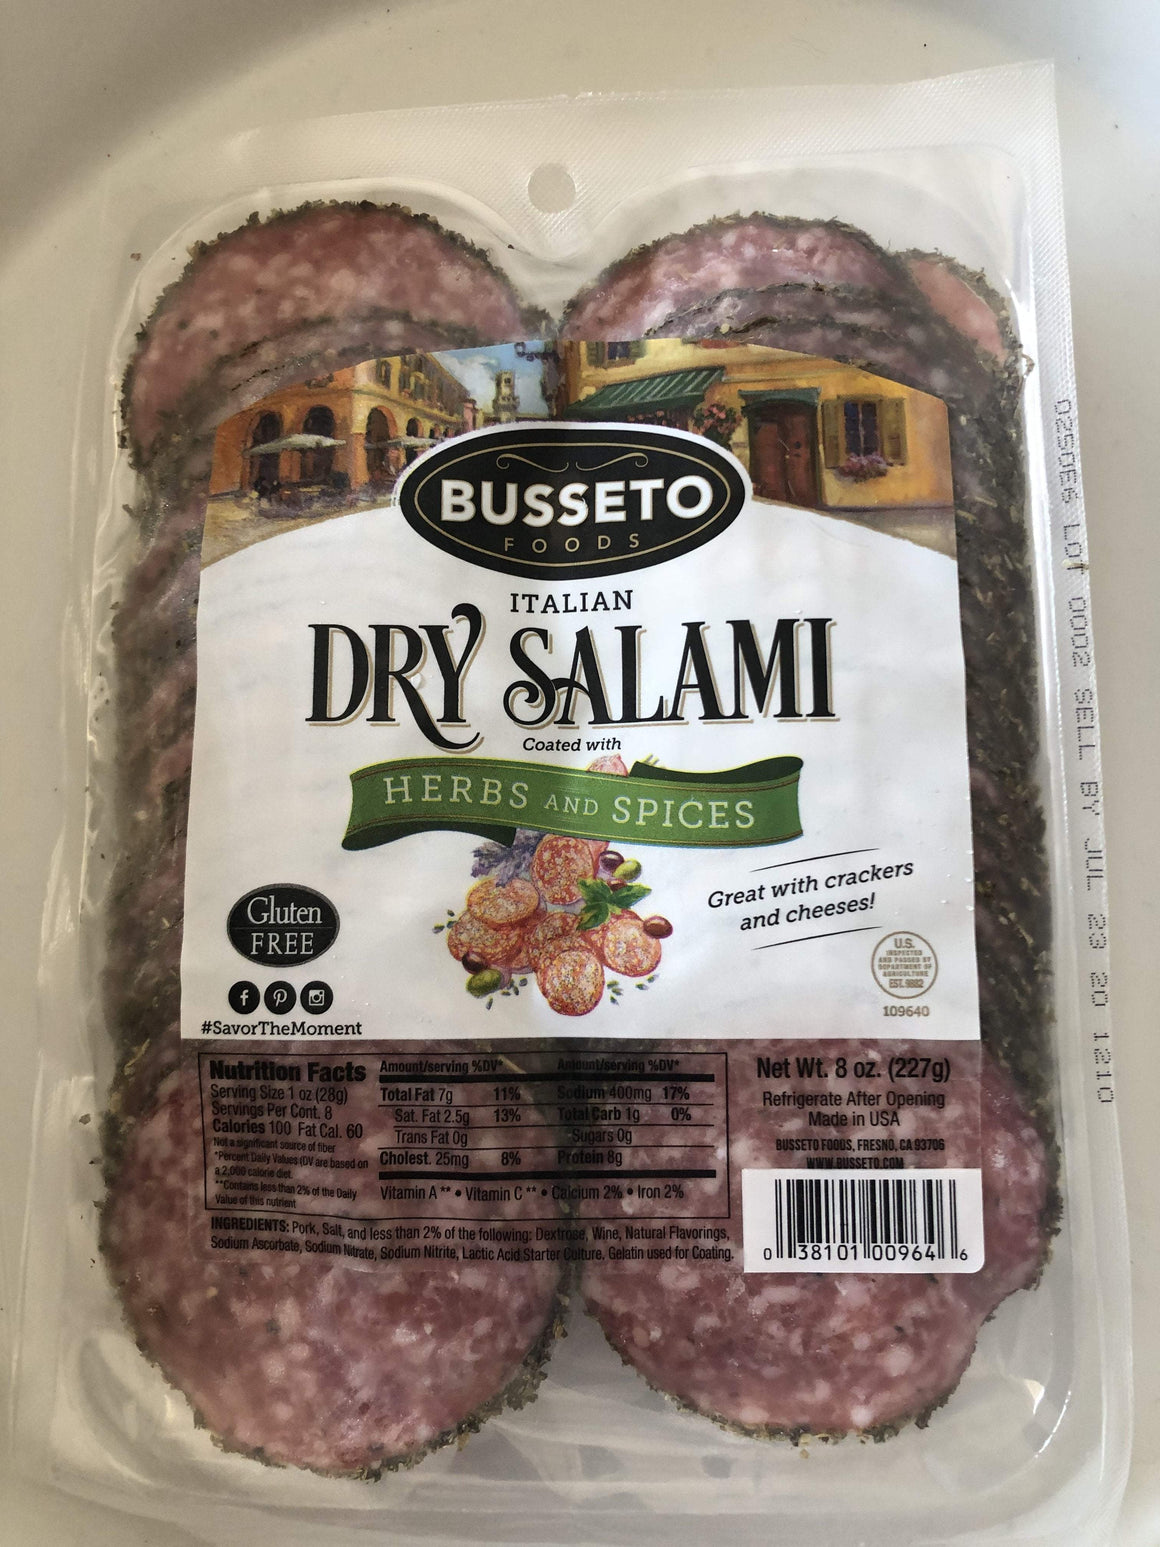 Busseto Italian Dry Salami Coated with Herbs and Spices 8 oz